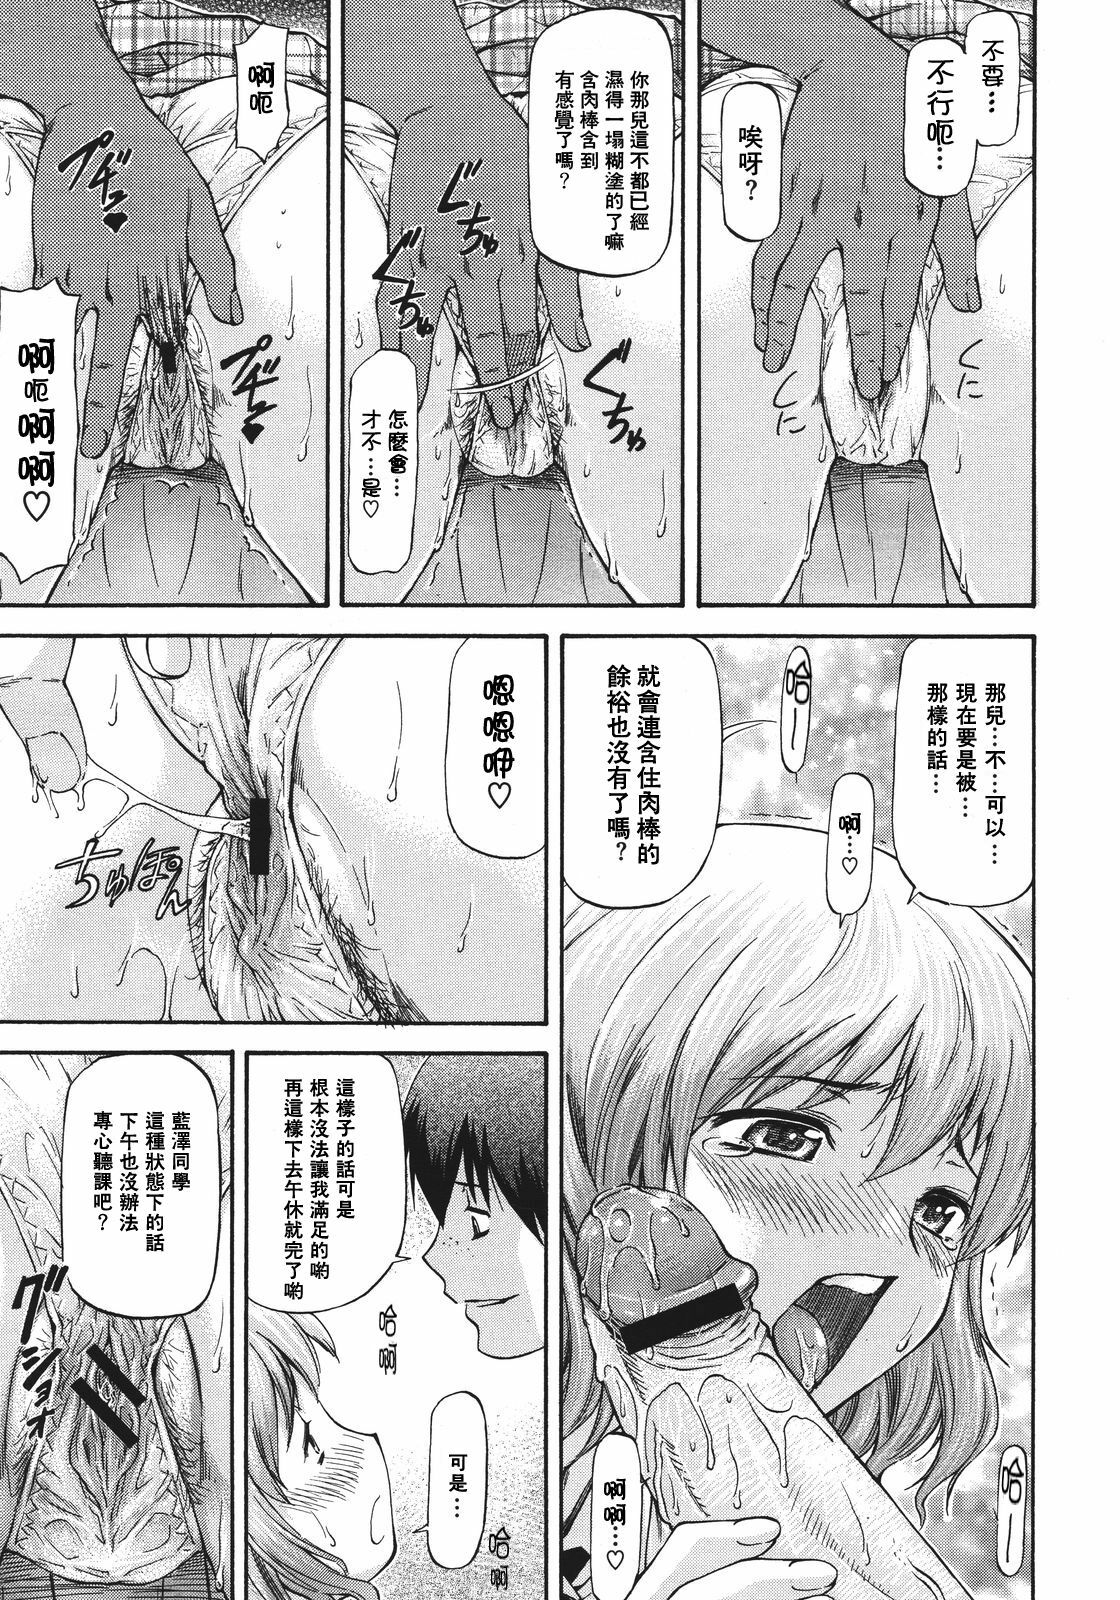 [Nagare Ippon] Bug Ch. 2 [Chinese] [流浪猫·里汉化组] page 9 full